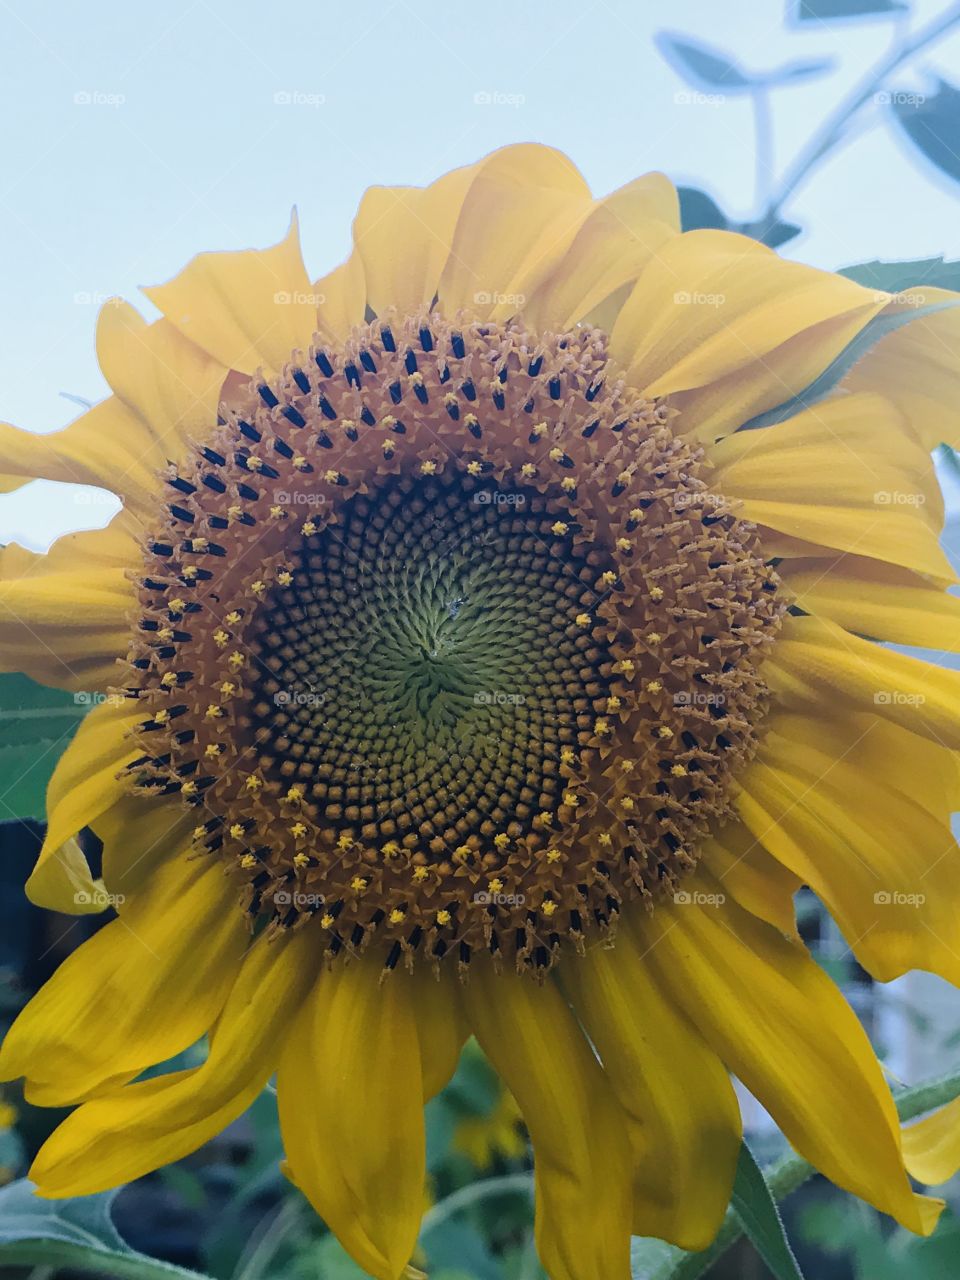 Close up of a single sunflower